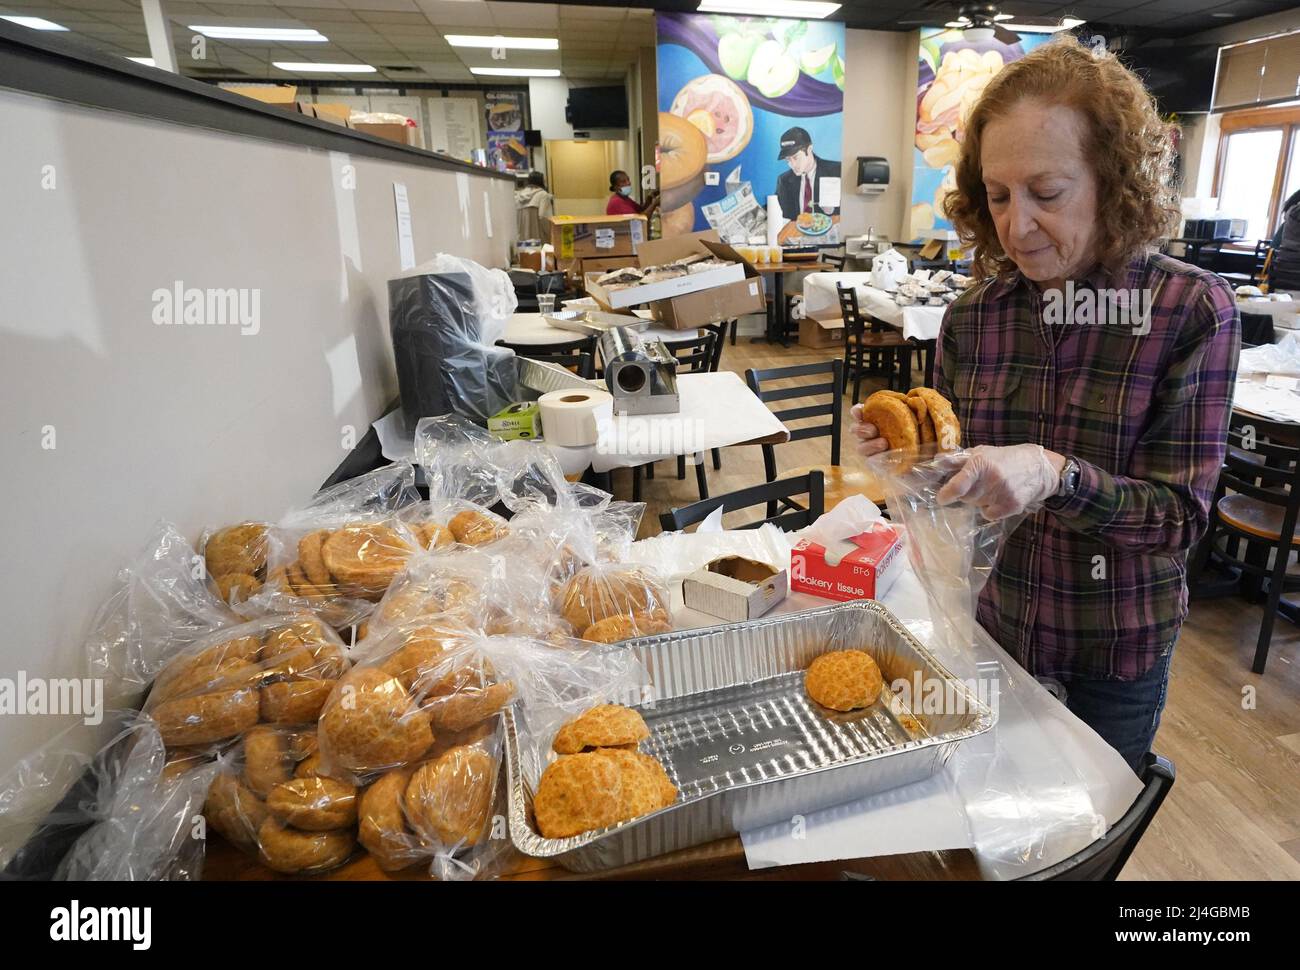 Creve Coeur, United States. 15th Apr, 2022. Worker Cheryl Waldman bags bulkas, an unleven bread for Passover, at Kohn's Deli in Creve Coeur, Missouri on Thursday, April 14, 2022. Passover, which begins on April 17, 2022 is a major Jewish holiday that celebrates the exodus of the Israelites from slavery in Egypt. Photo by Bill Greenblatt/UPI Credit: UPI/Alamy Live News Stock Photo